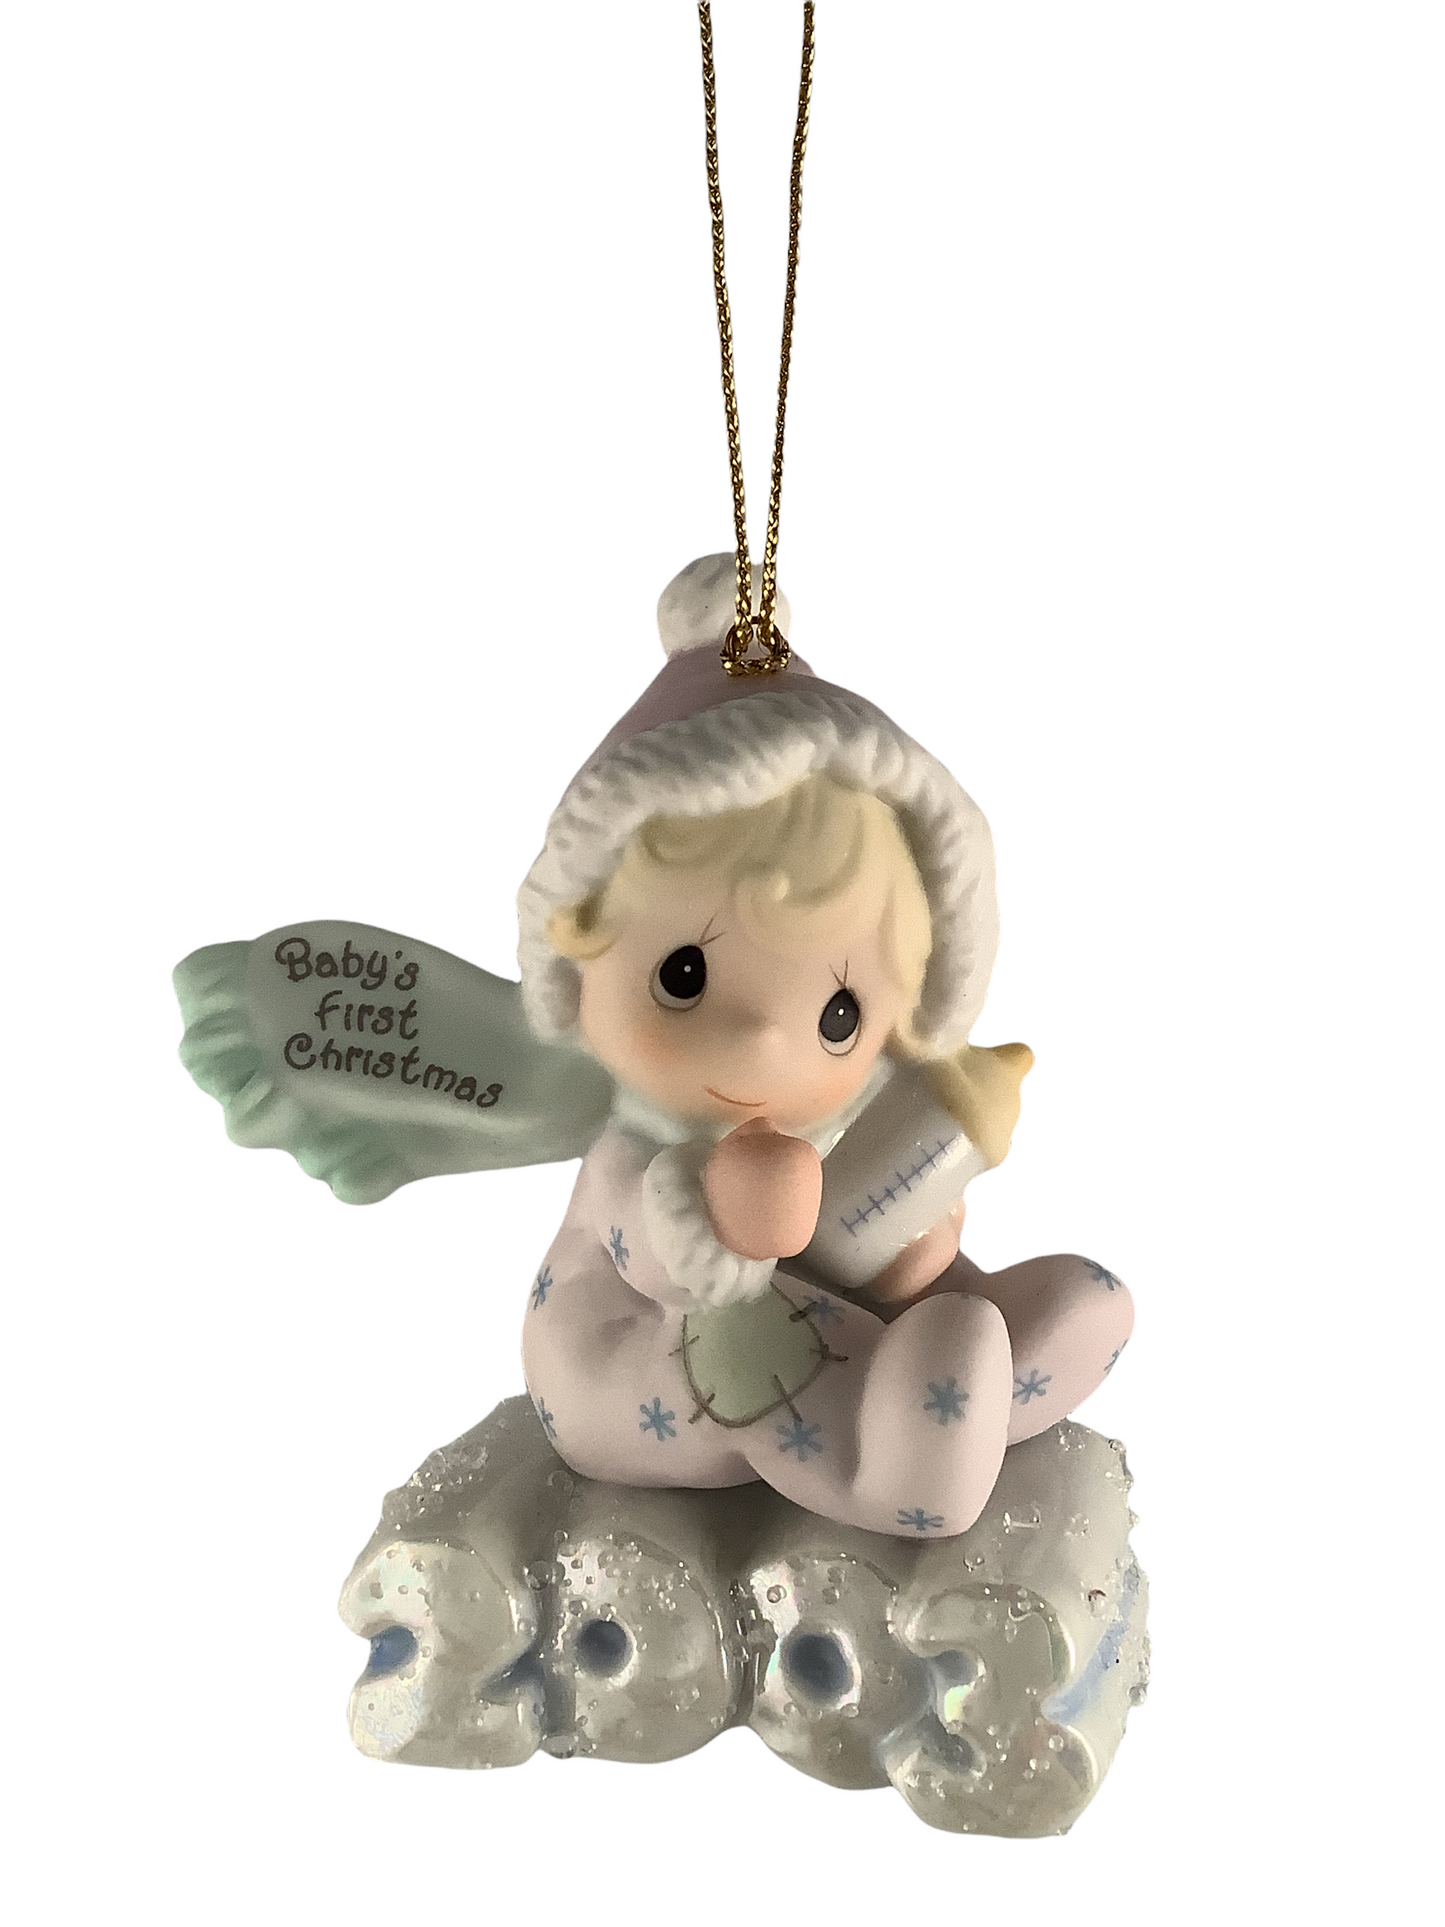 Baby's First Christmas 2003 (Girl) - Precious Moment Ornament